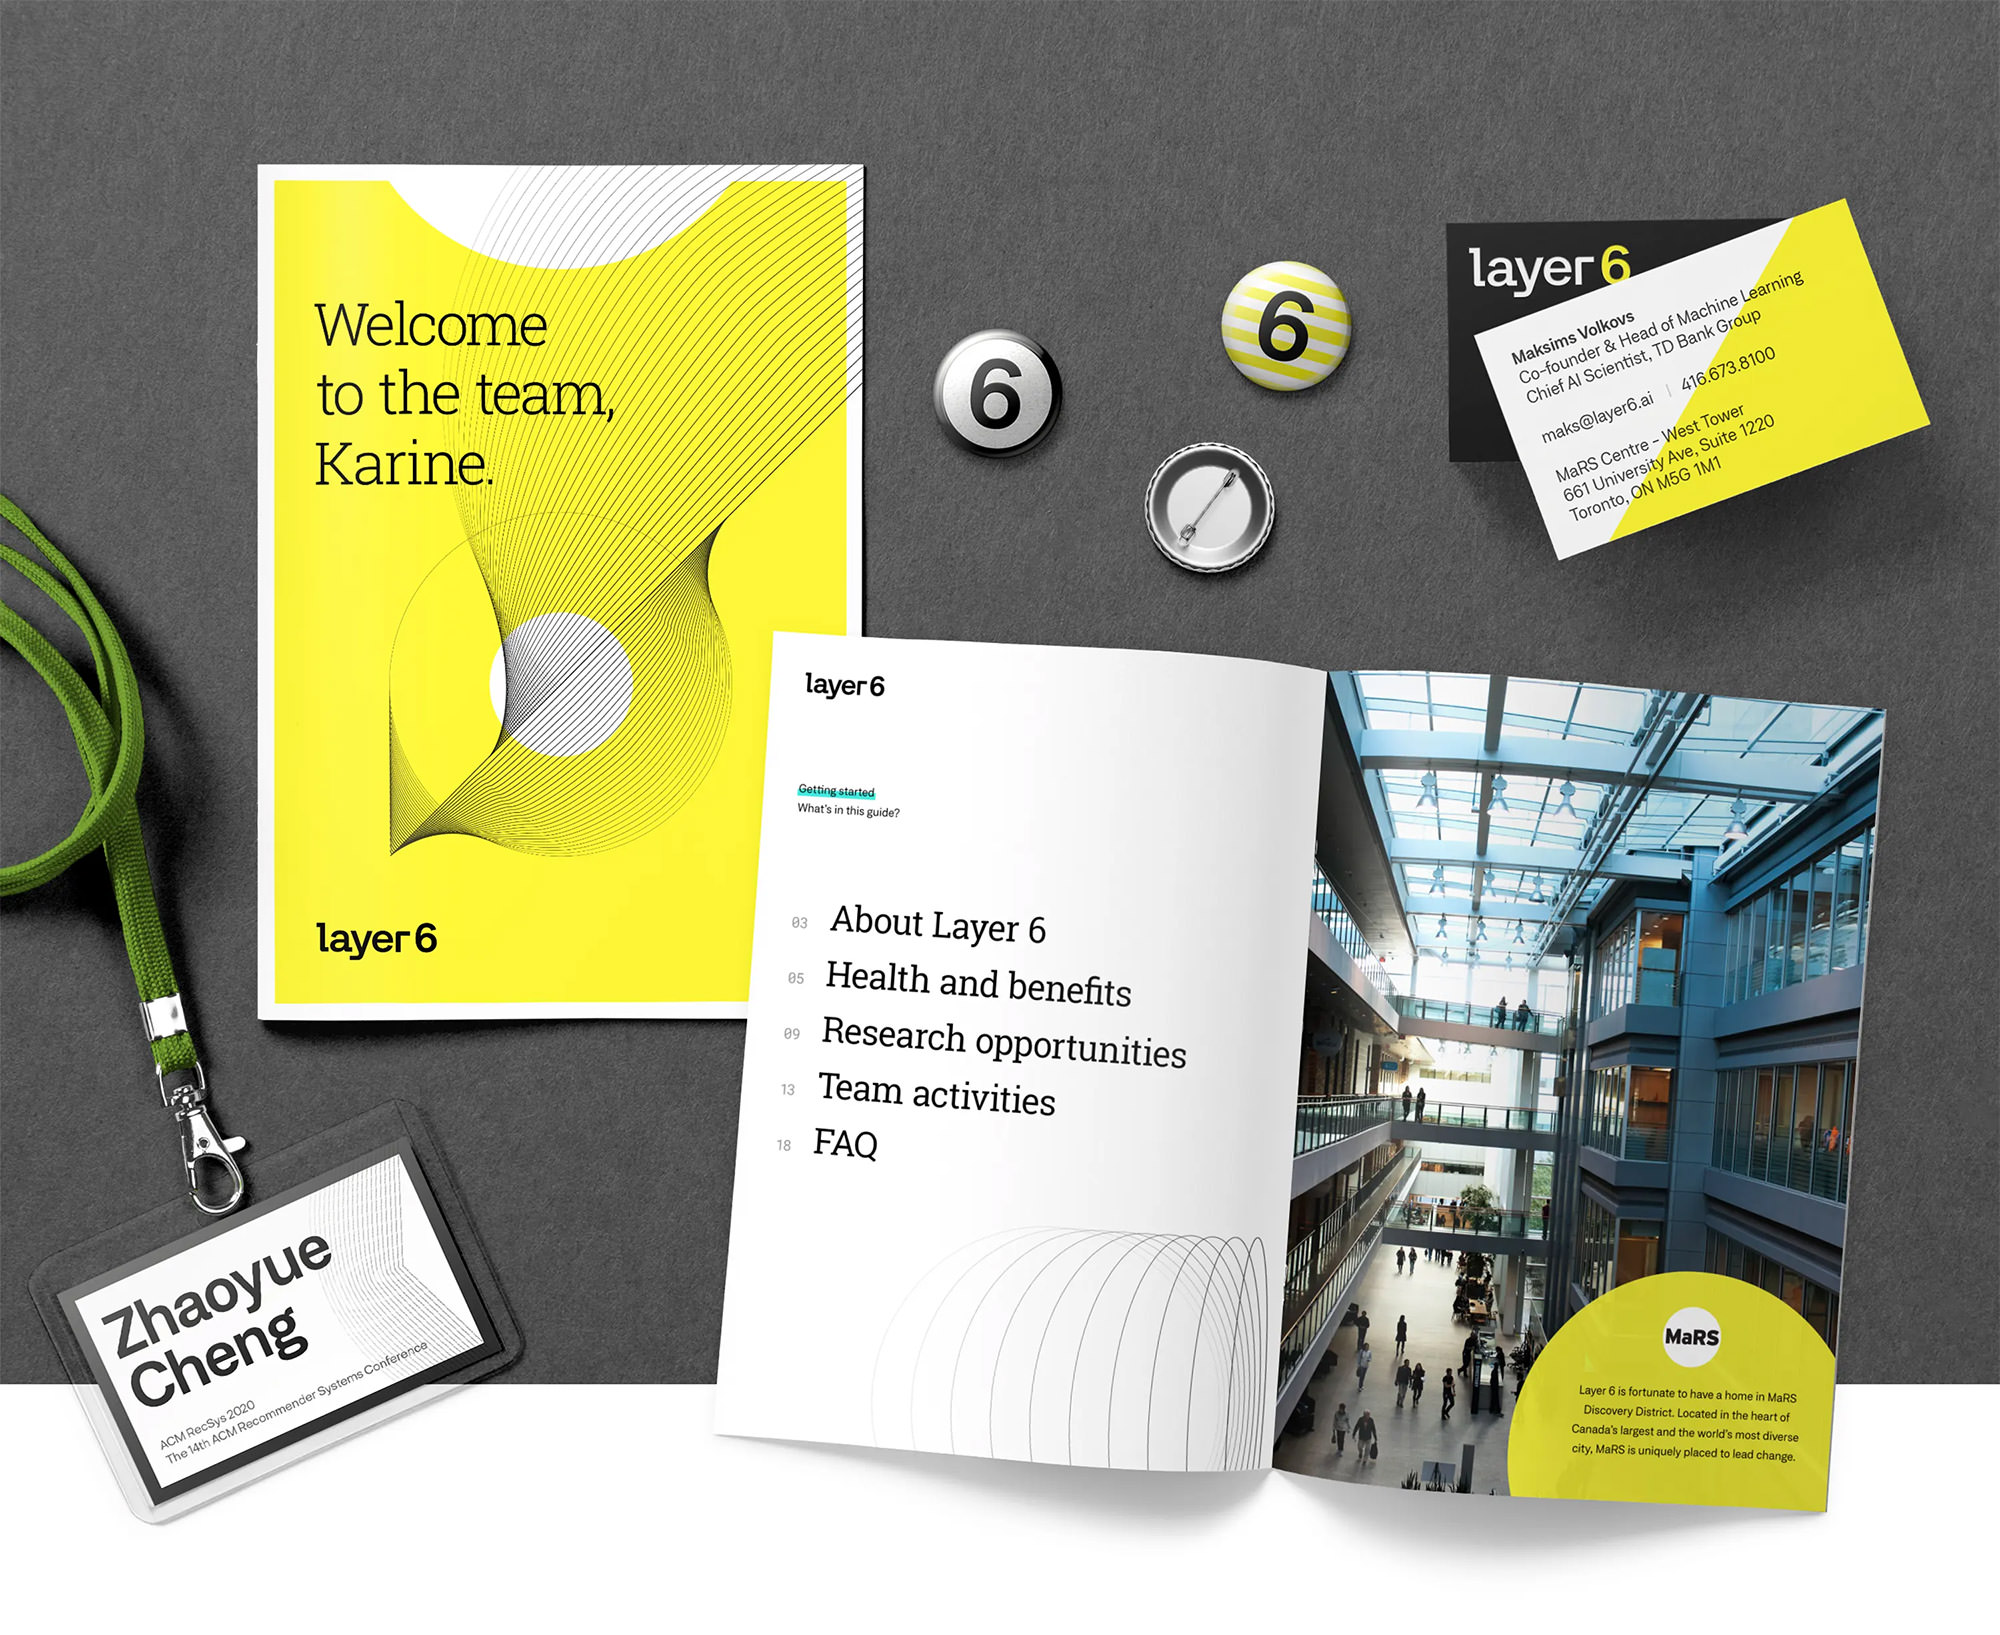 Print and collateral design exploration for a Layer 6 team member welcome kit